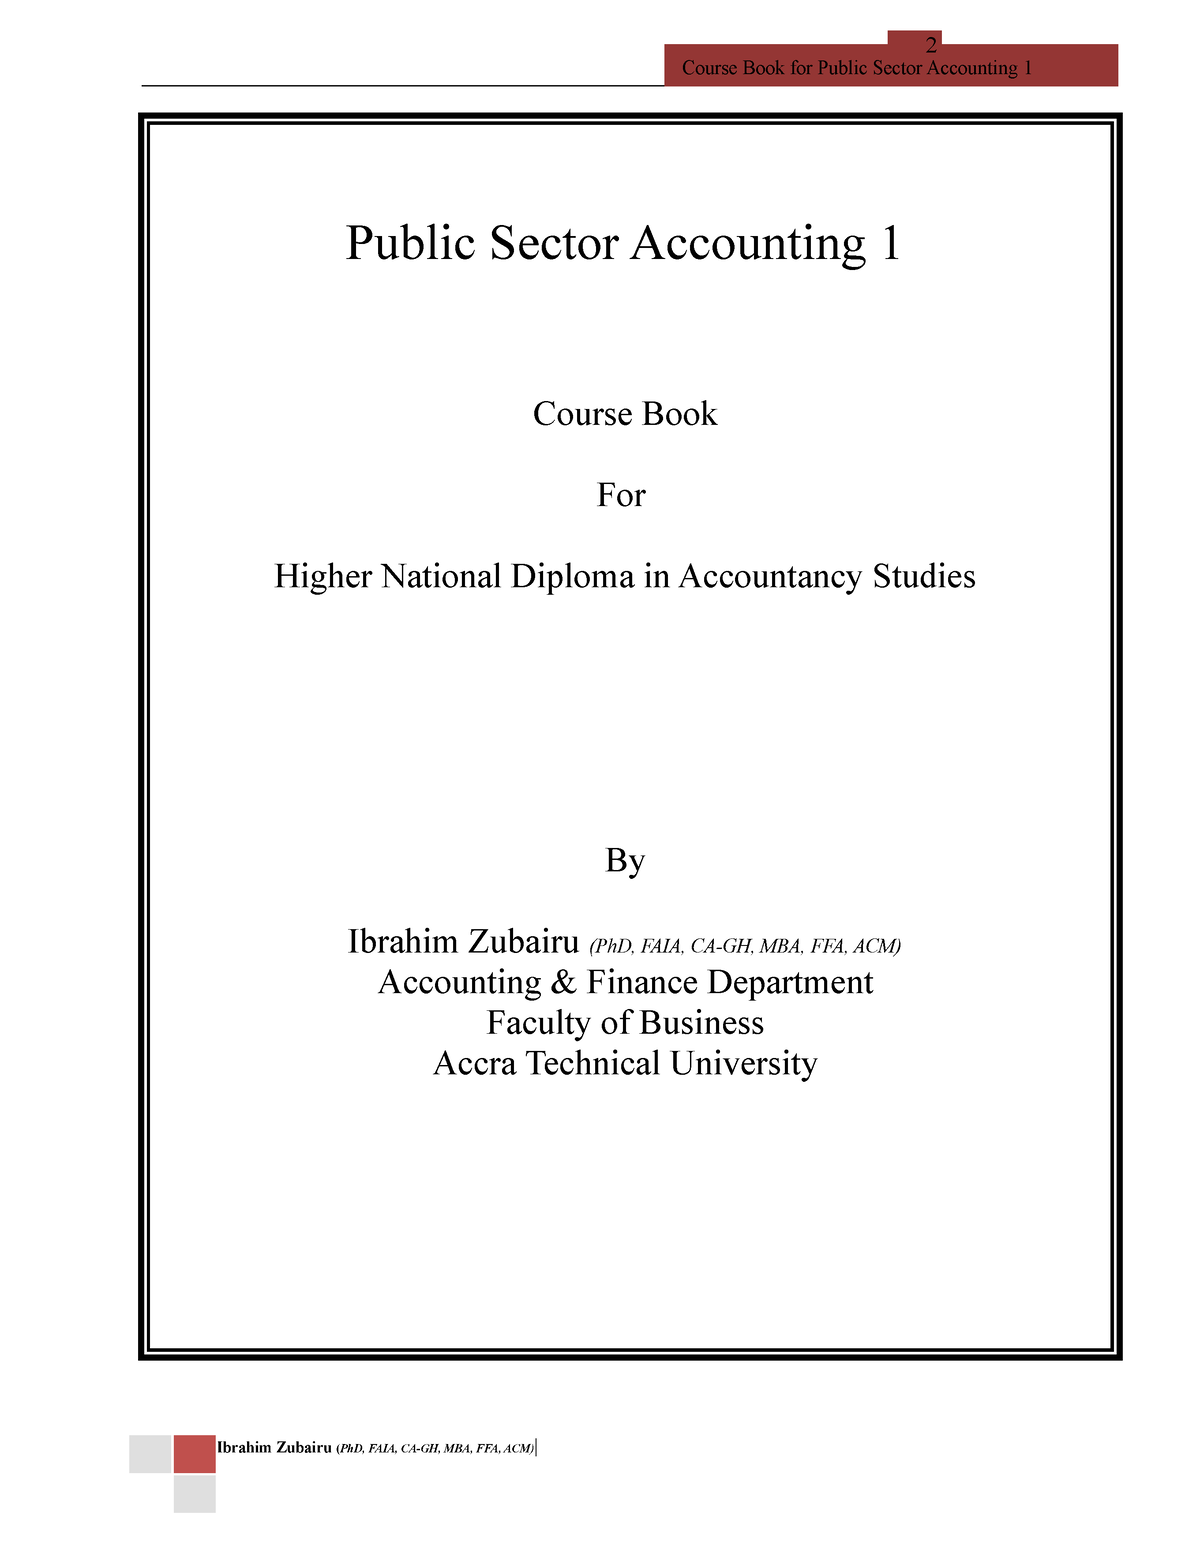 research topics on public sector accounting